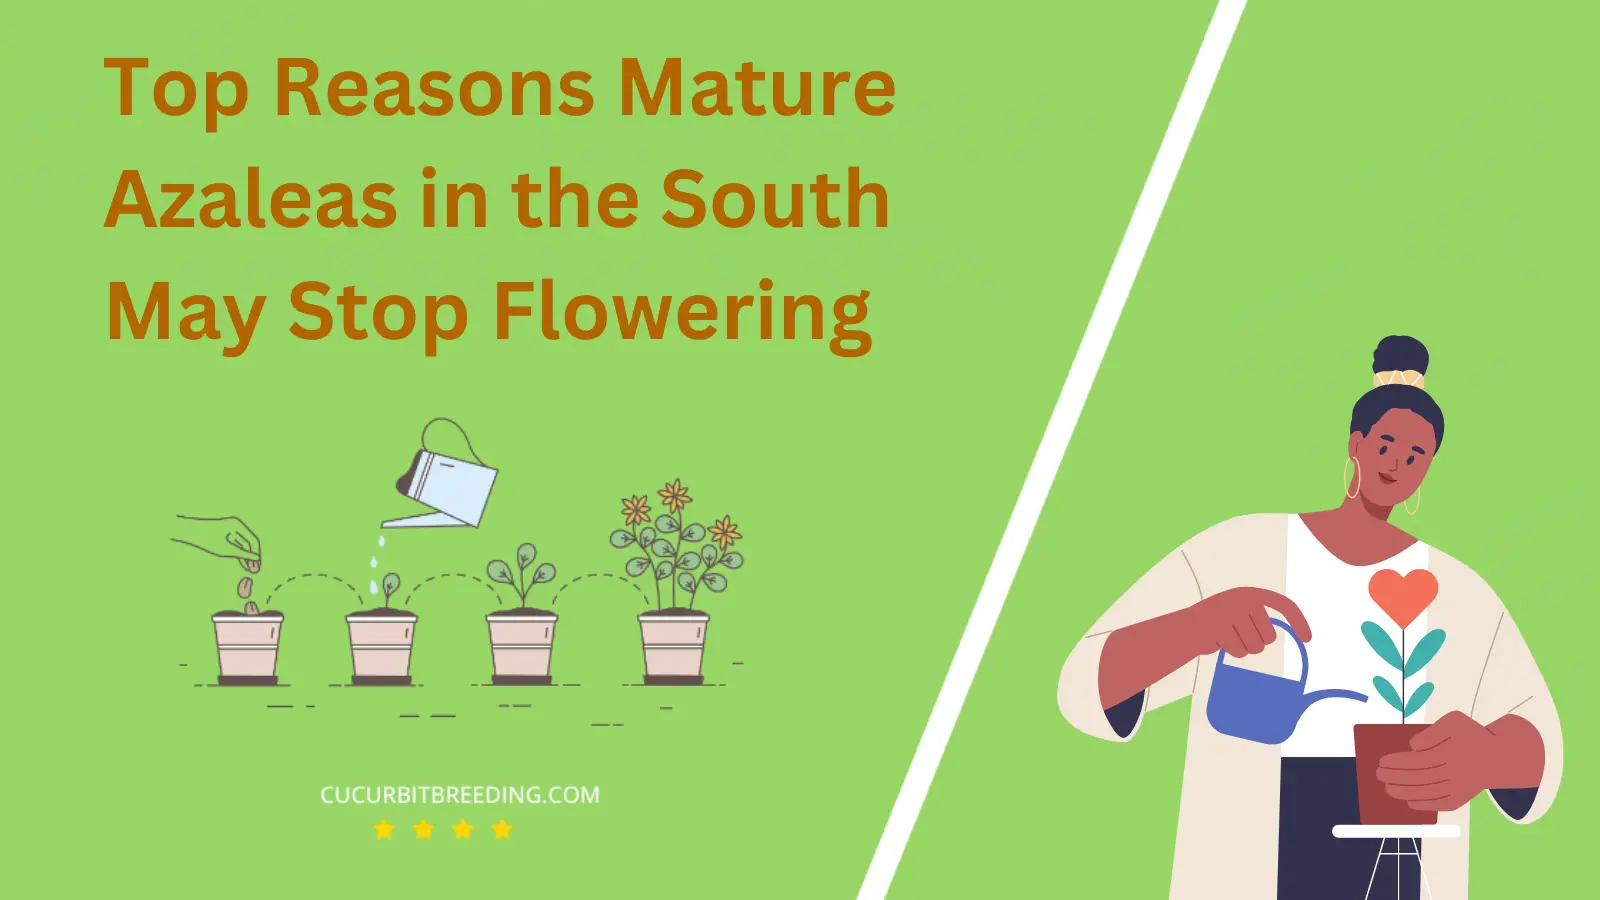 Top Reasons Mature Azaleas in the South May Stop Flowering